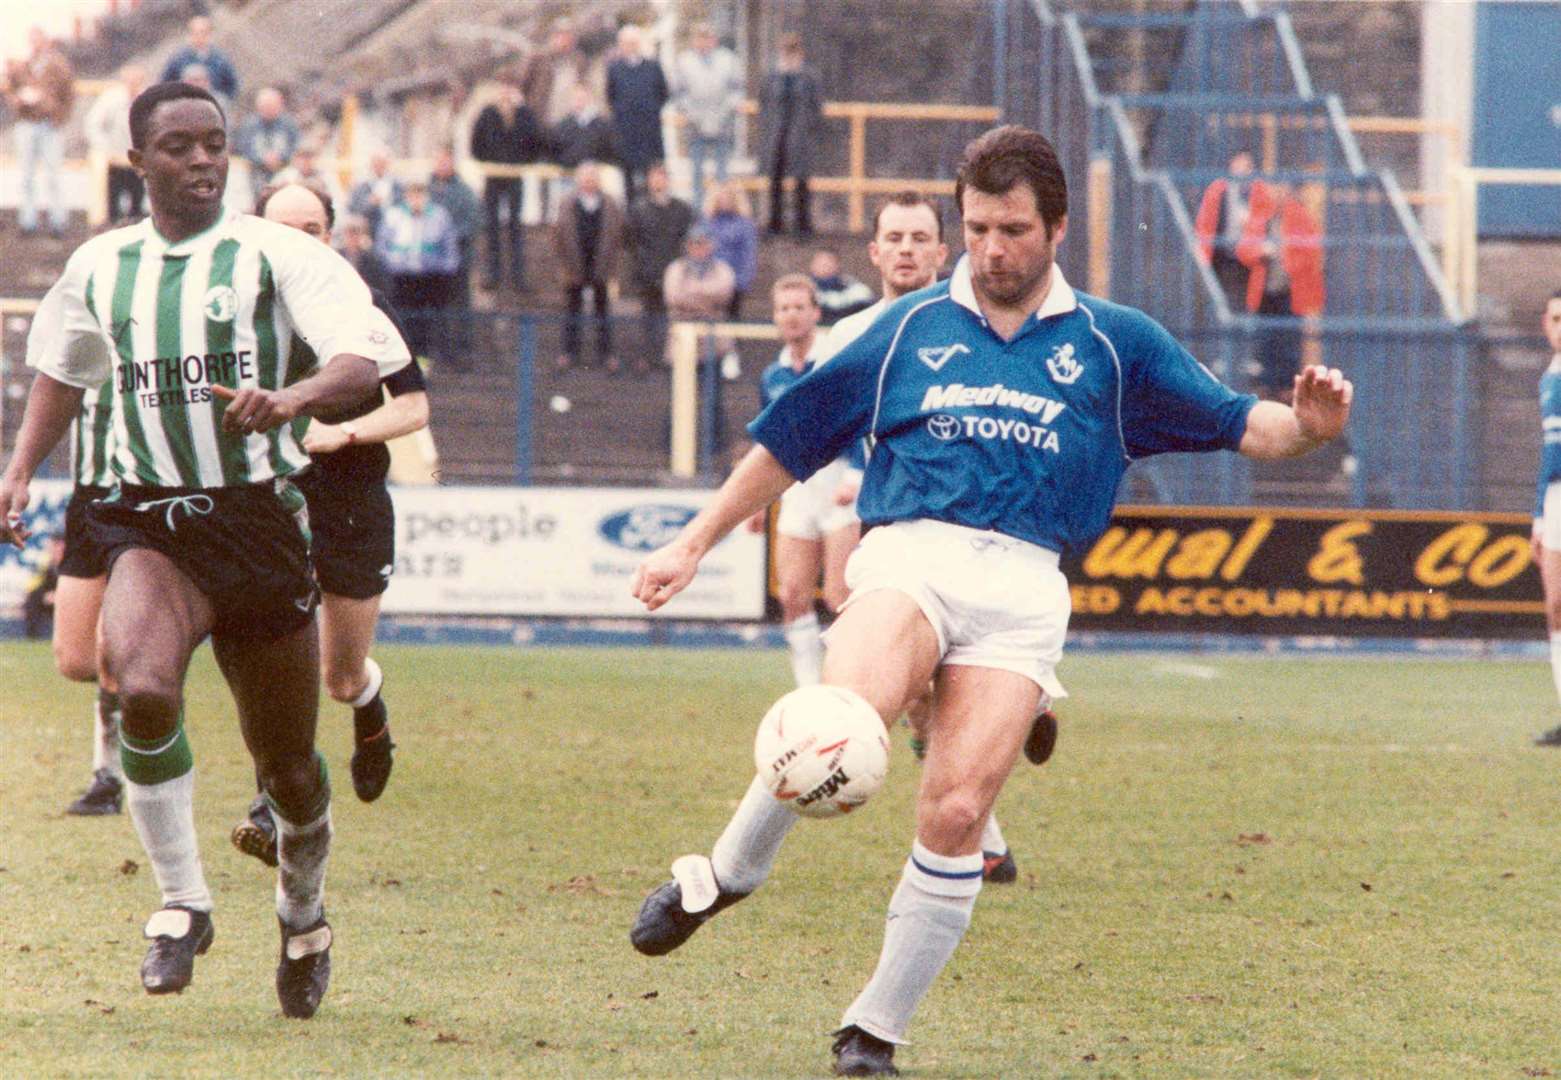 Steve Lovell during his playing days for the Gills